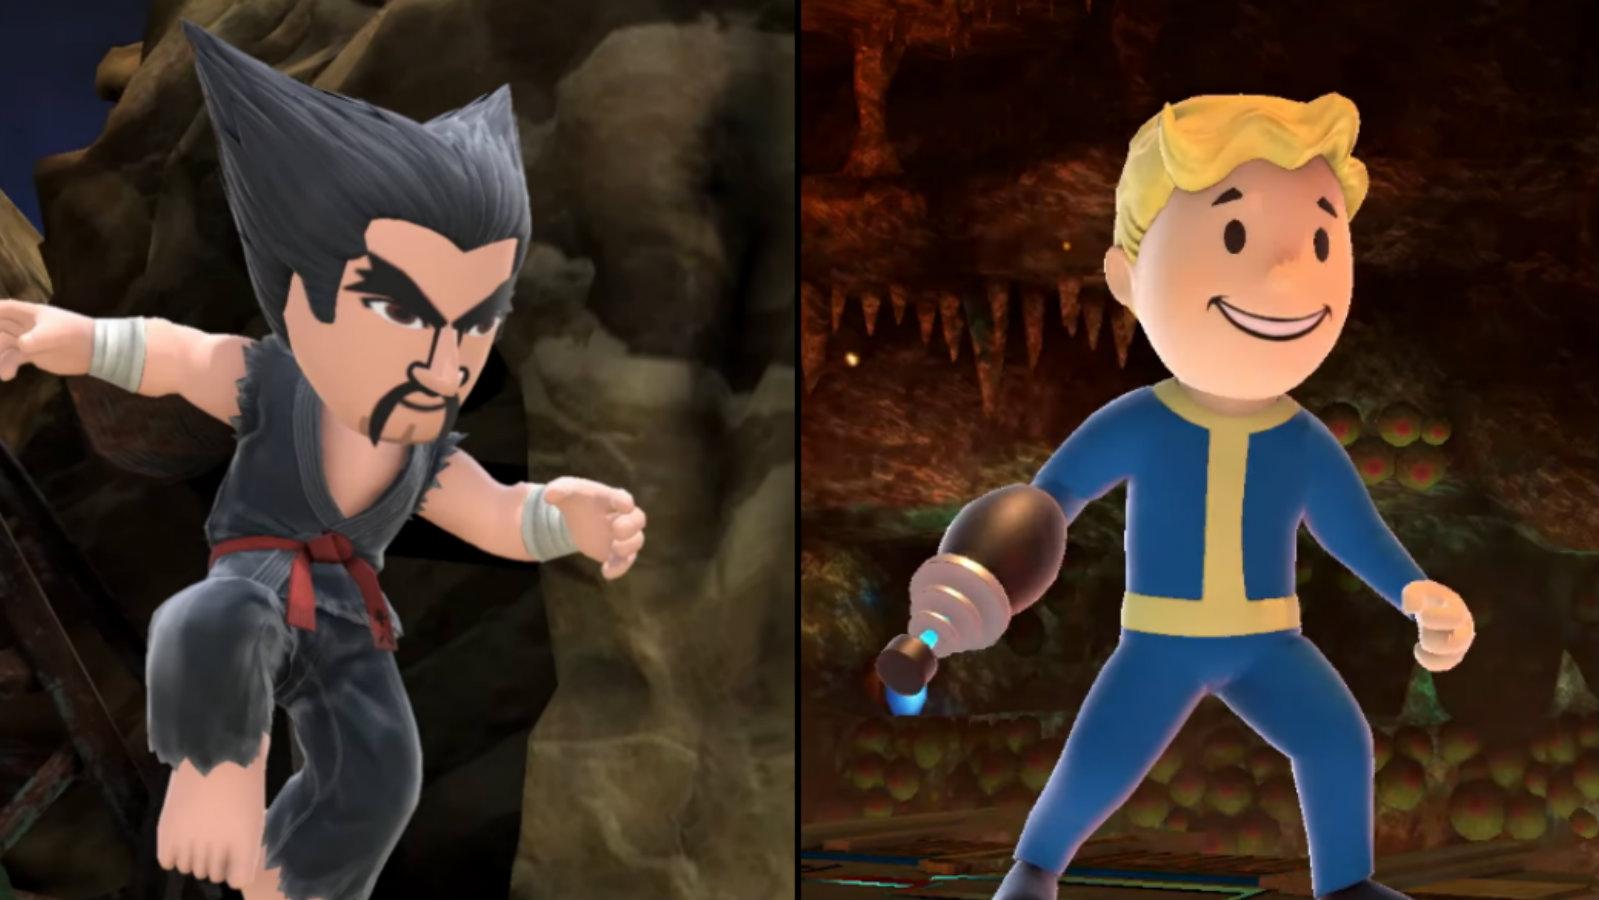 Tekken's Heihachi and Fallout's Vault Boy join the battle in Smash Ultimate